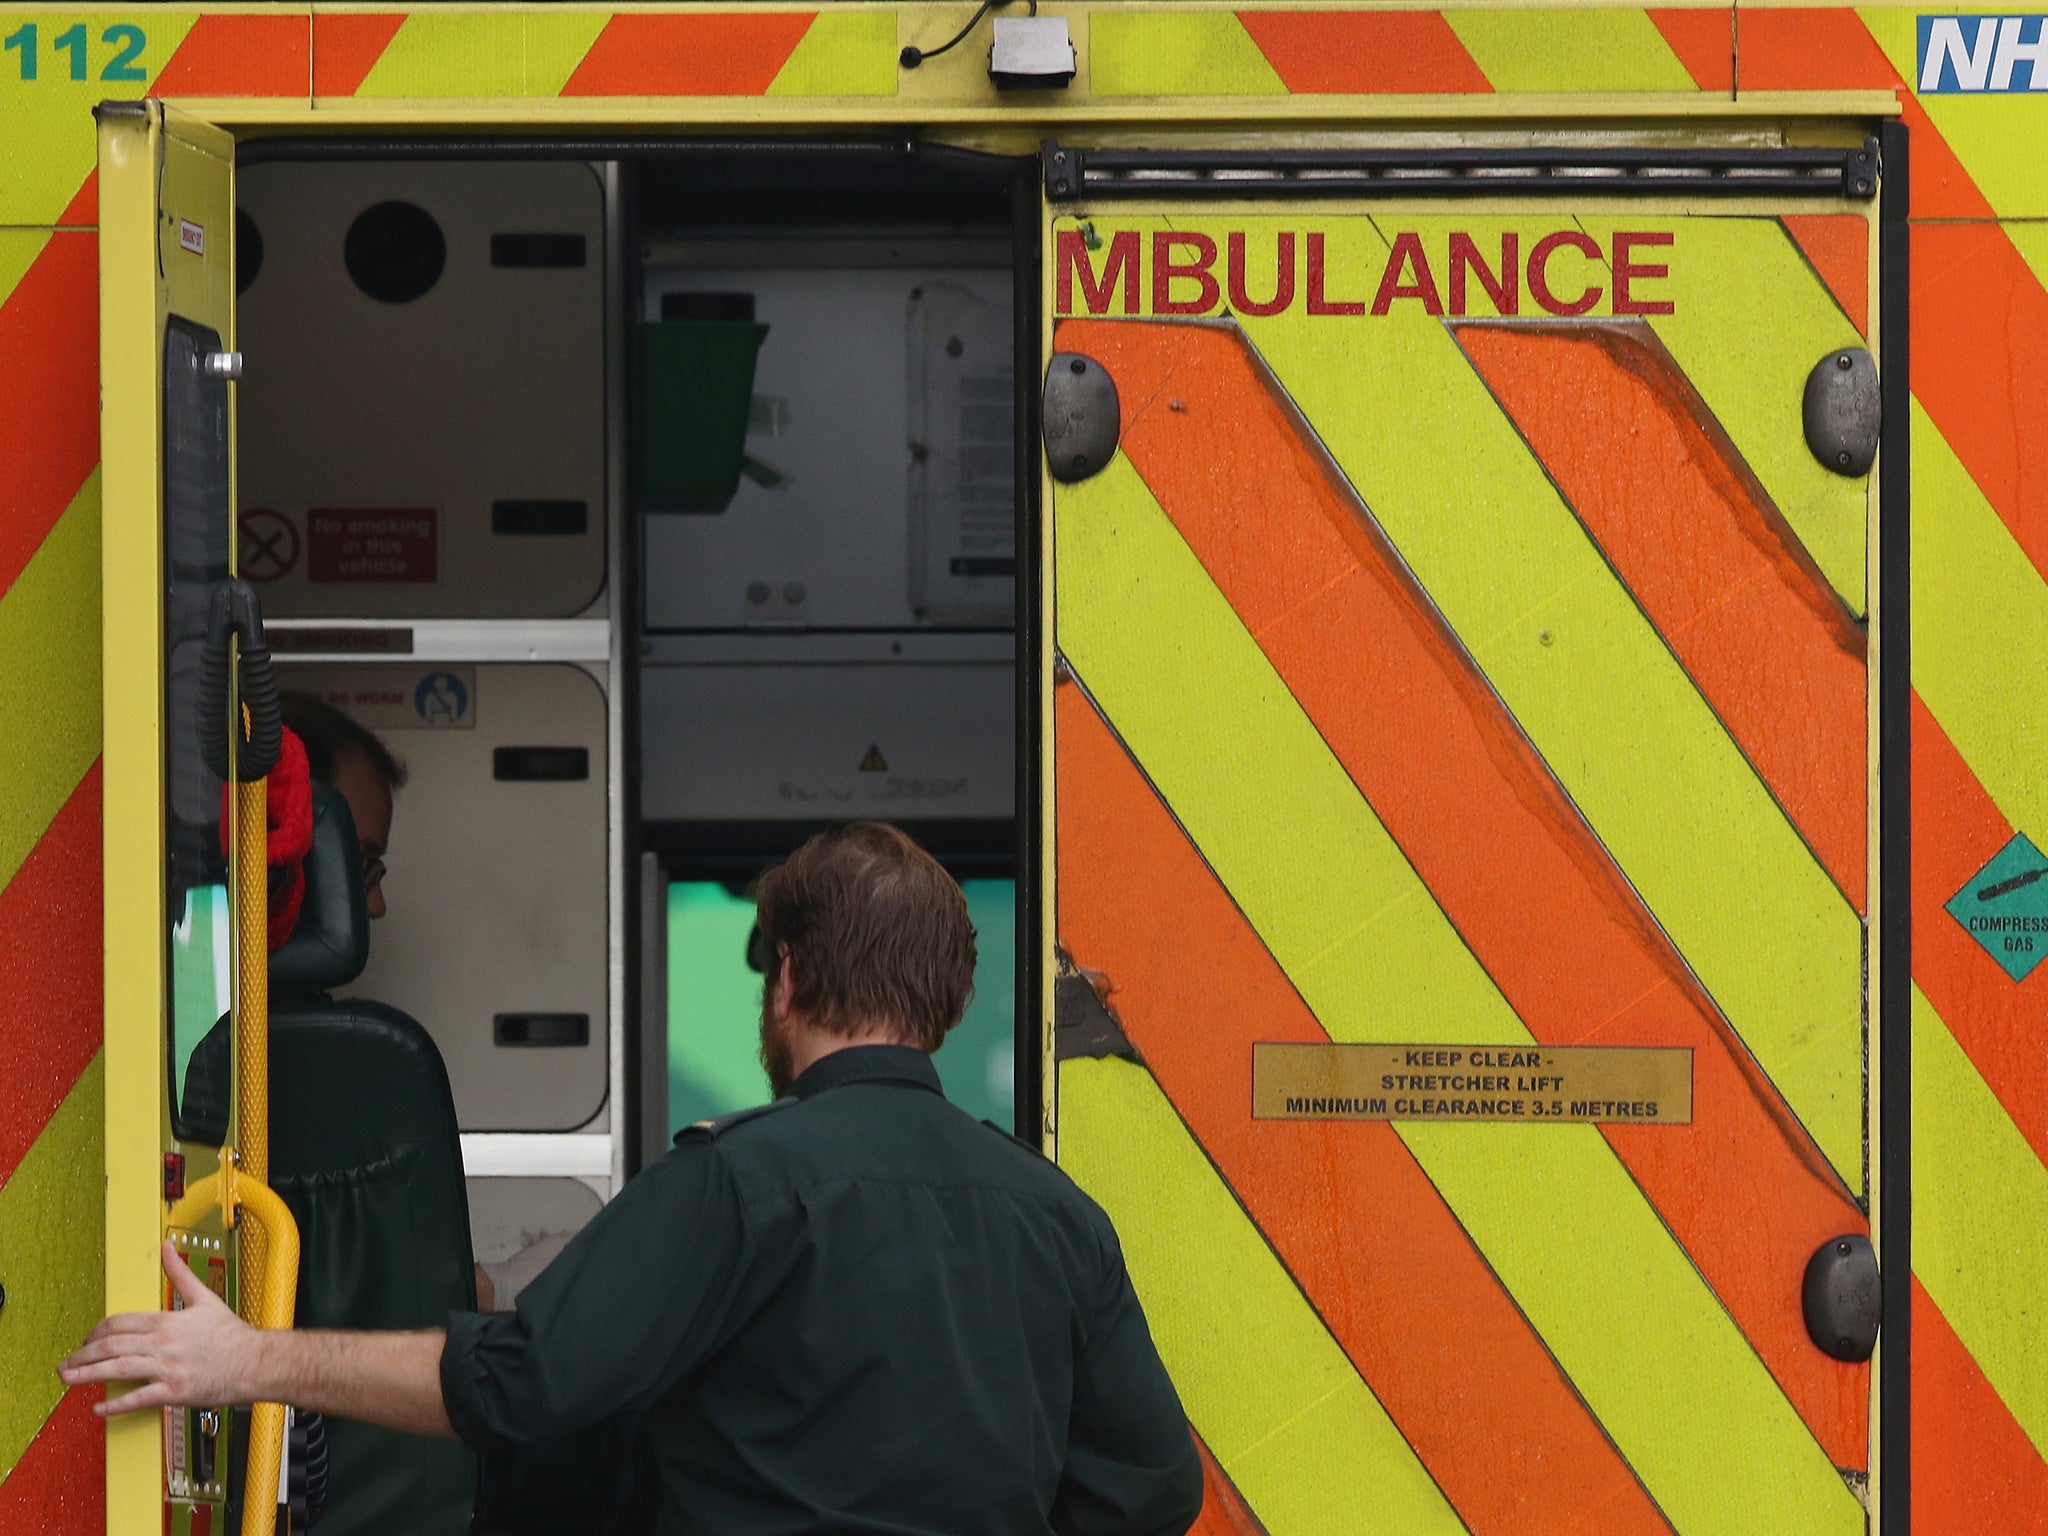 Ambulances can be taken away from emergencies dealing with drunk revellers